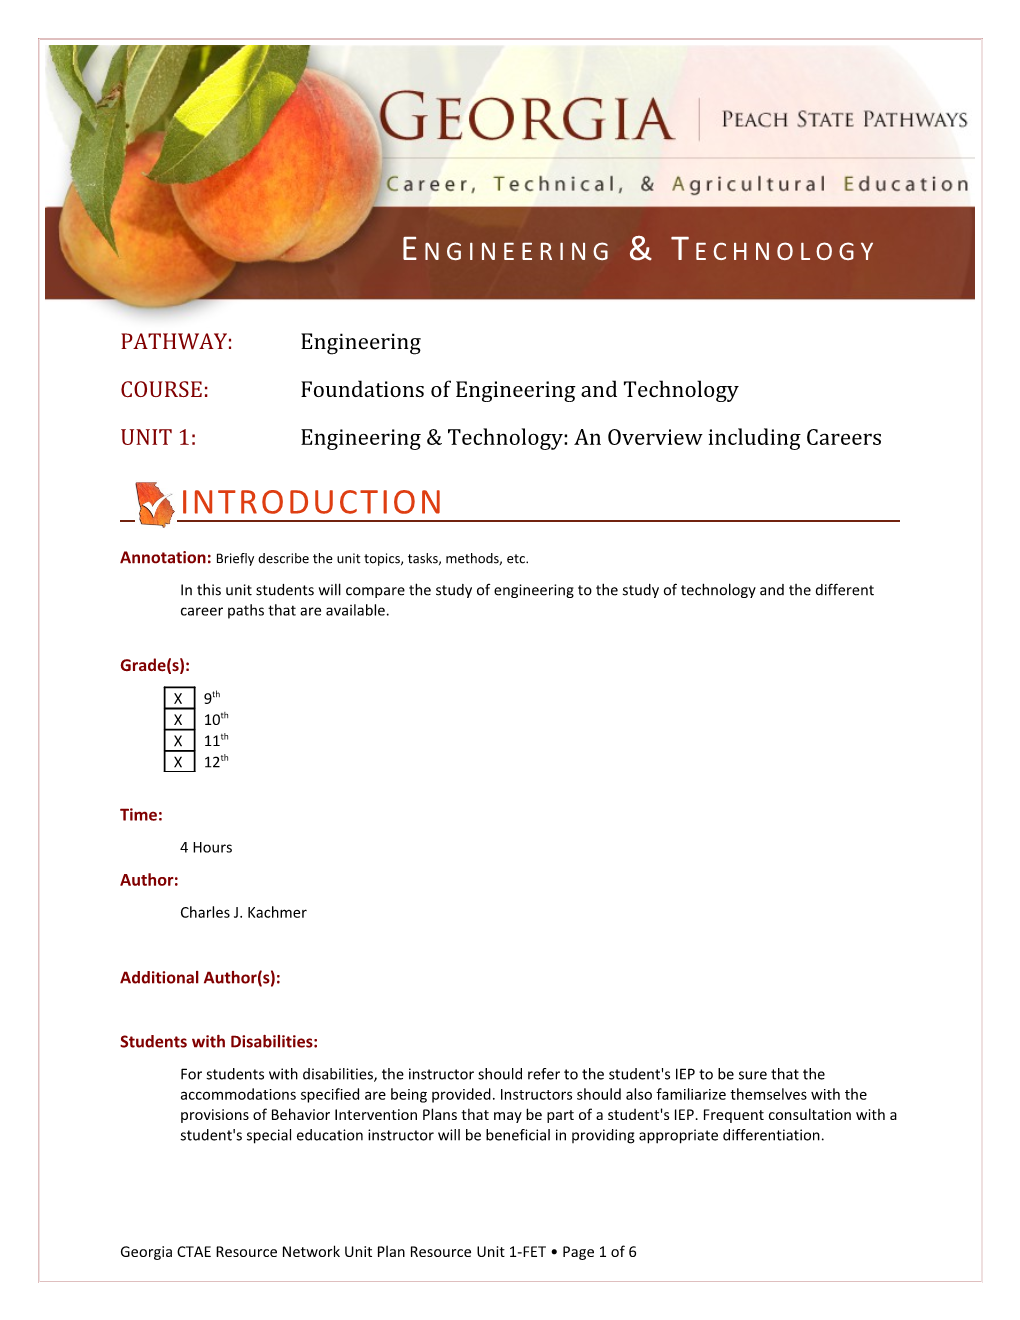 COURSE: Foundations of Engineering and Technology